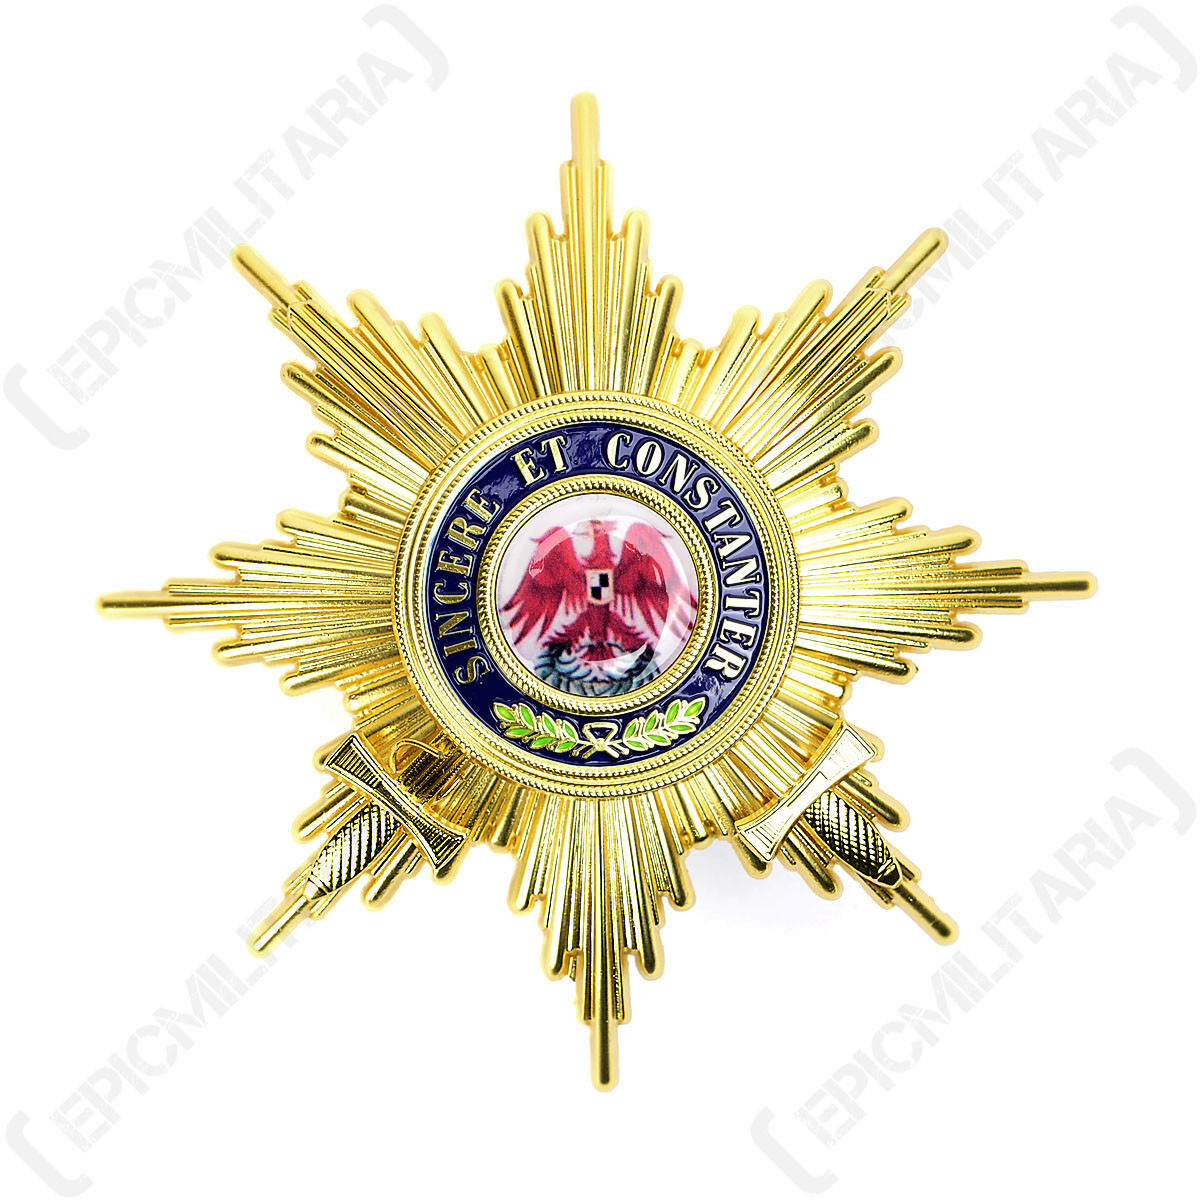 Grand Cross Order of the Red Eagle with Swords Breast Star Badge Award  Repro New